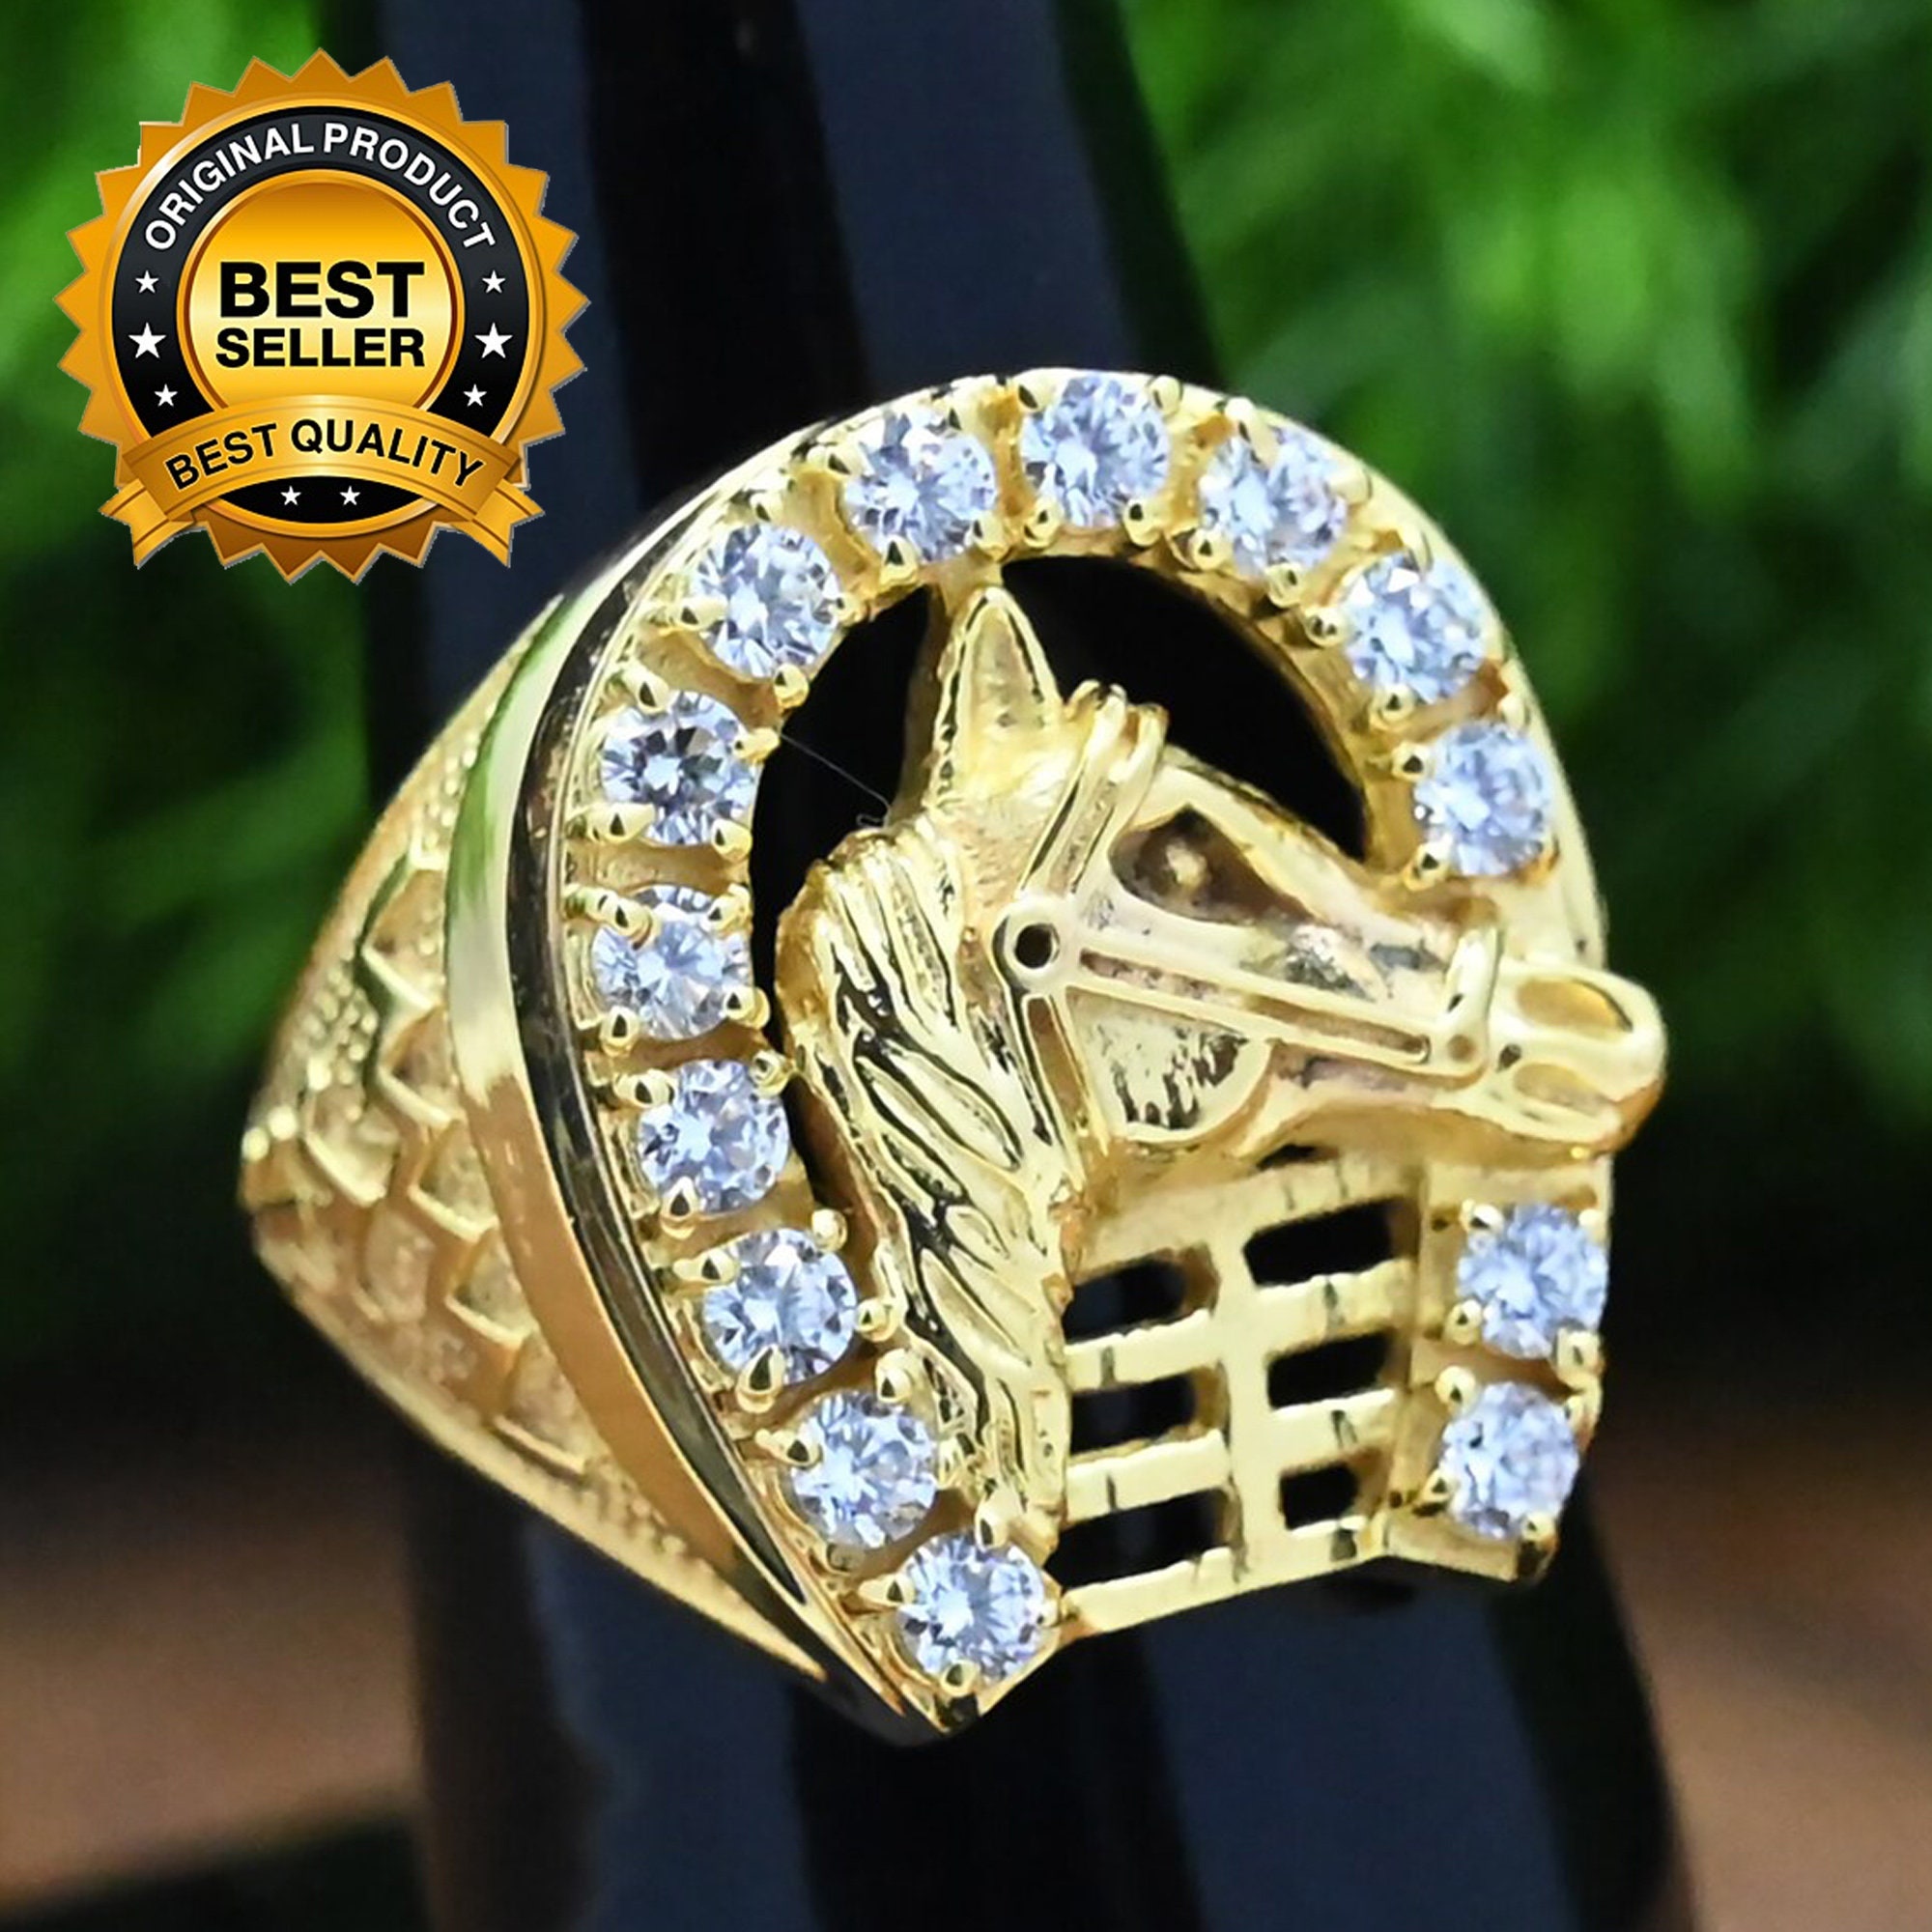 22kt yellow gold handmade ring coin ring with fabulous horse design  victorian ring band unisex jewelry from rajasthan india GR004 | TRIBAL  ORNAMENTS